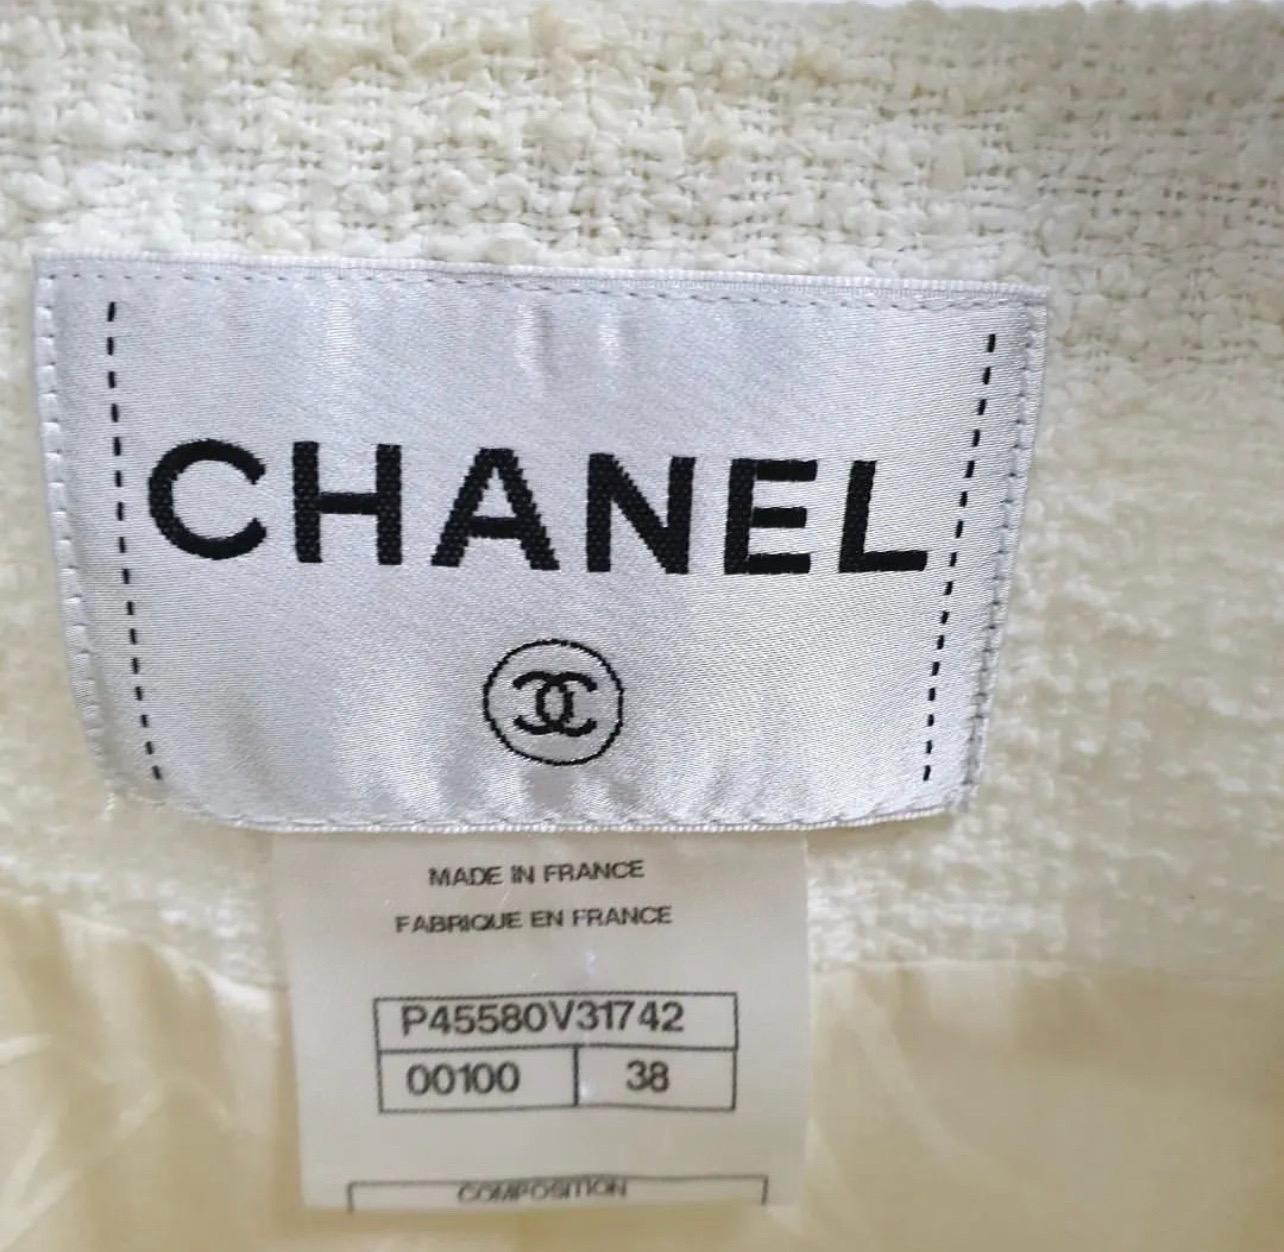 Chanel Paris - Dallas white tweed jacket with blue ribbed inserts. CC logo ruthenium buttins with stars.
100 cotton fully lined in silk with Camellia patterns.
Chanel logo and brand buttons
2 Patch pockets. There are traces of makeup powder on the